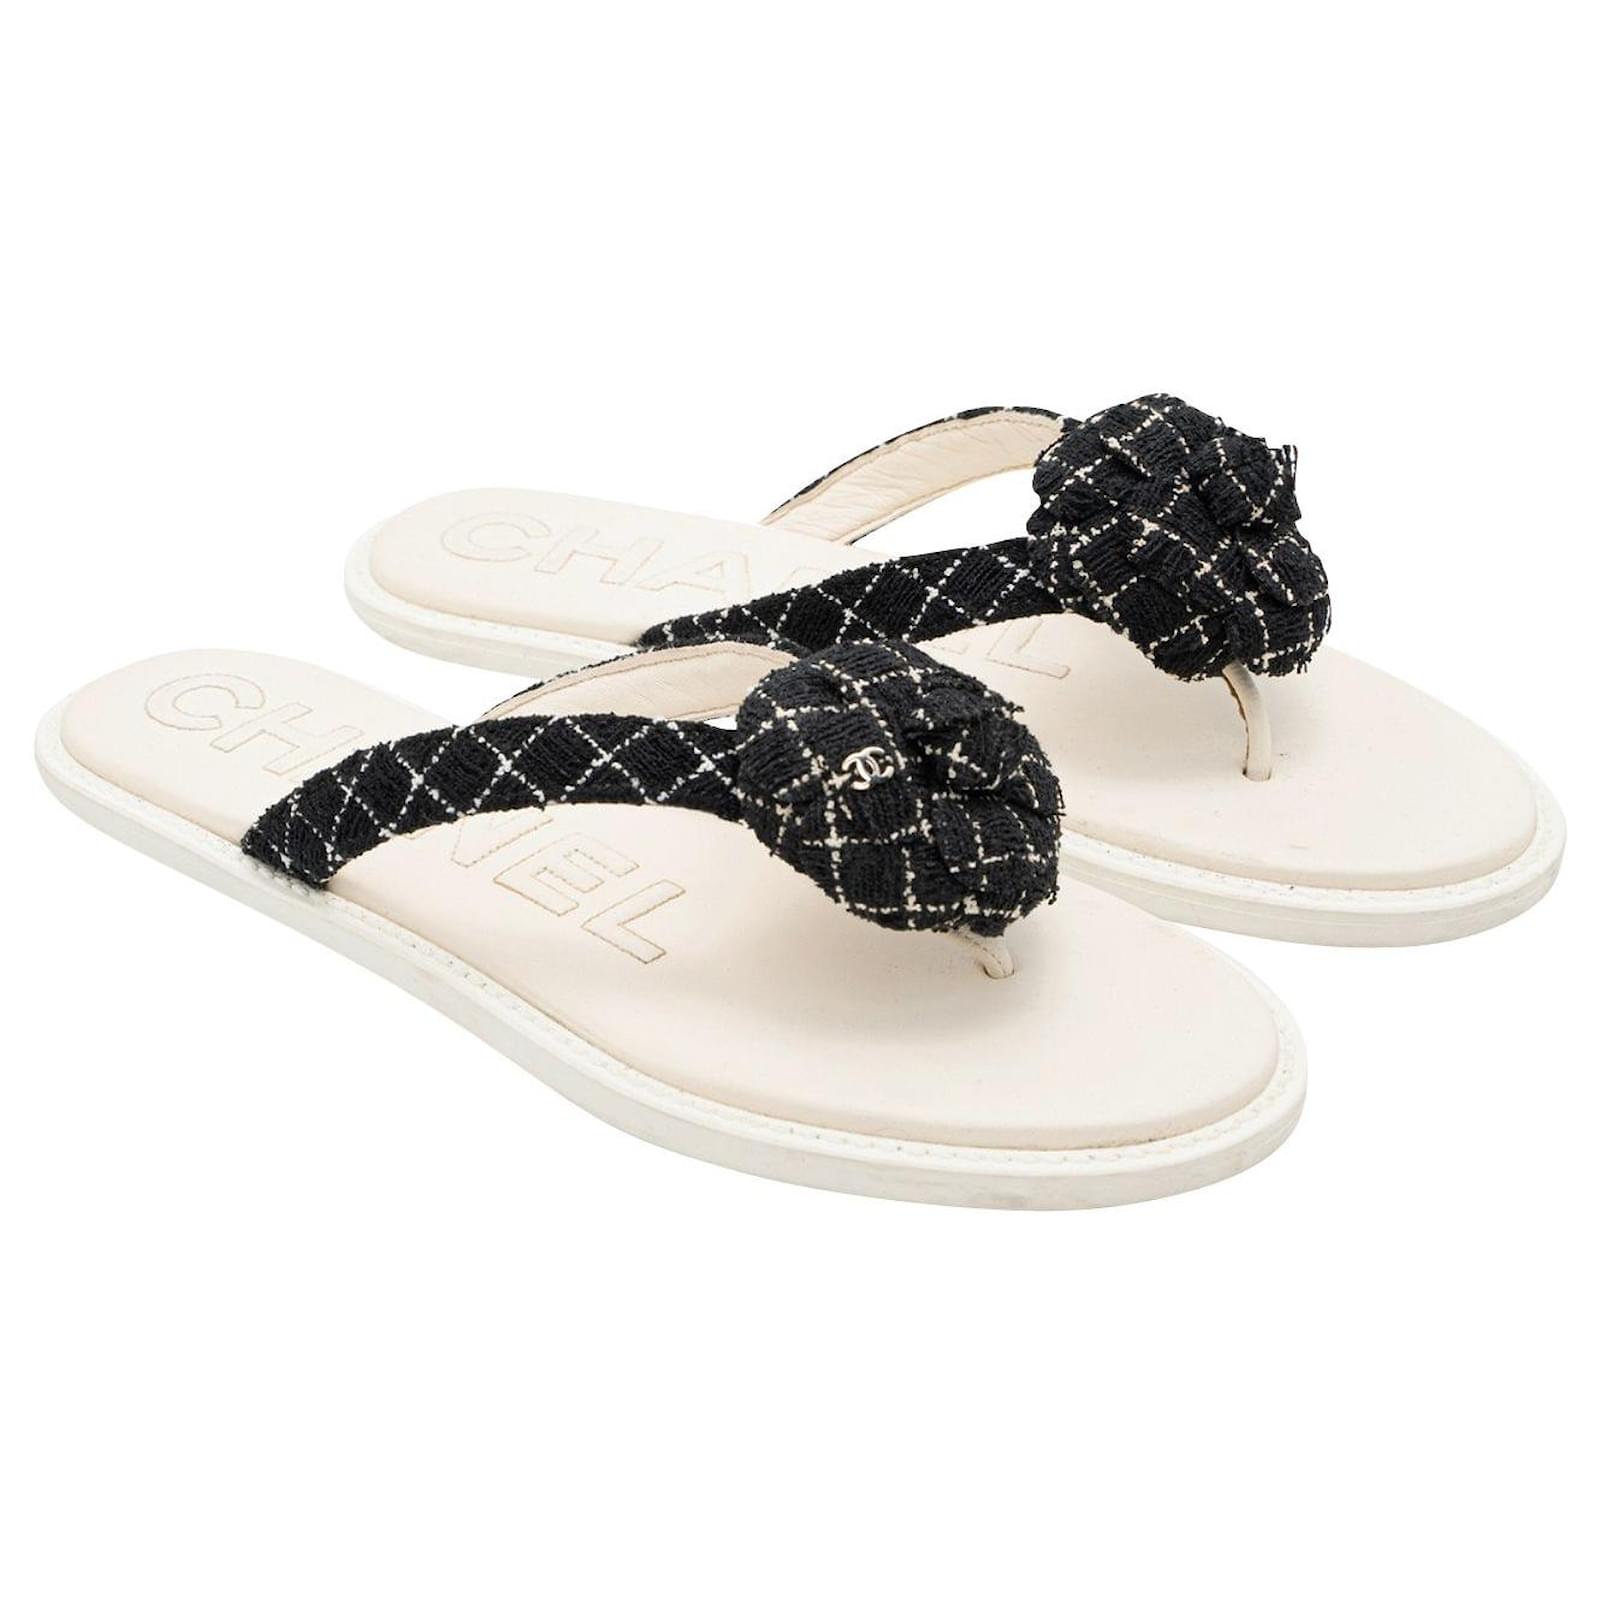 CHANEL 22S Camellia Leather Sandals 36 *New - Timeless Luxuries